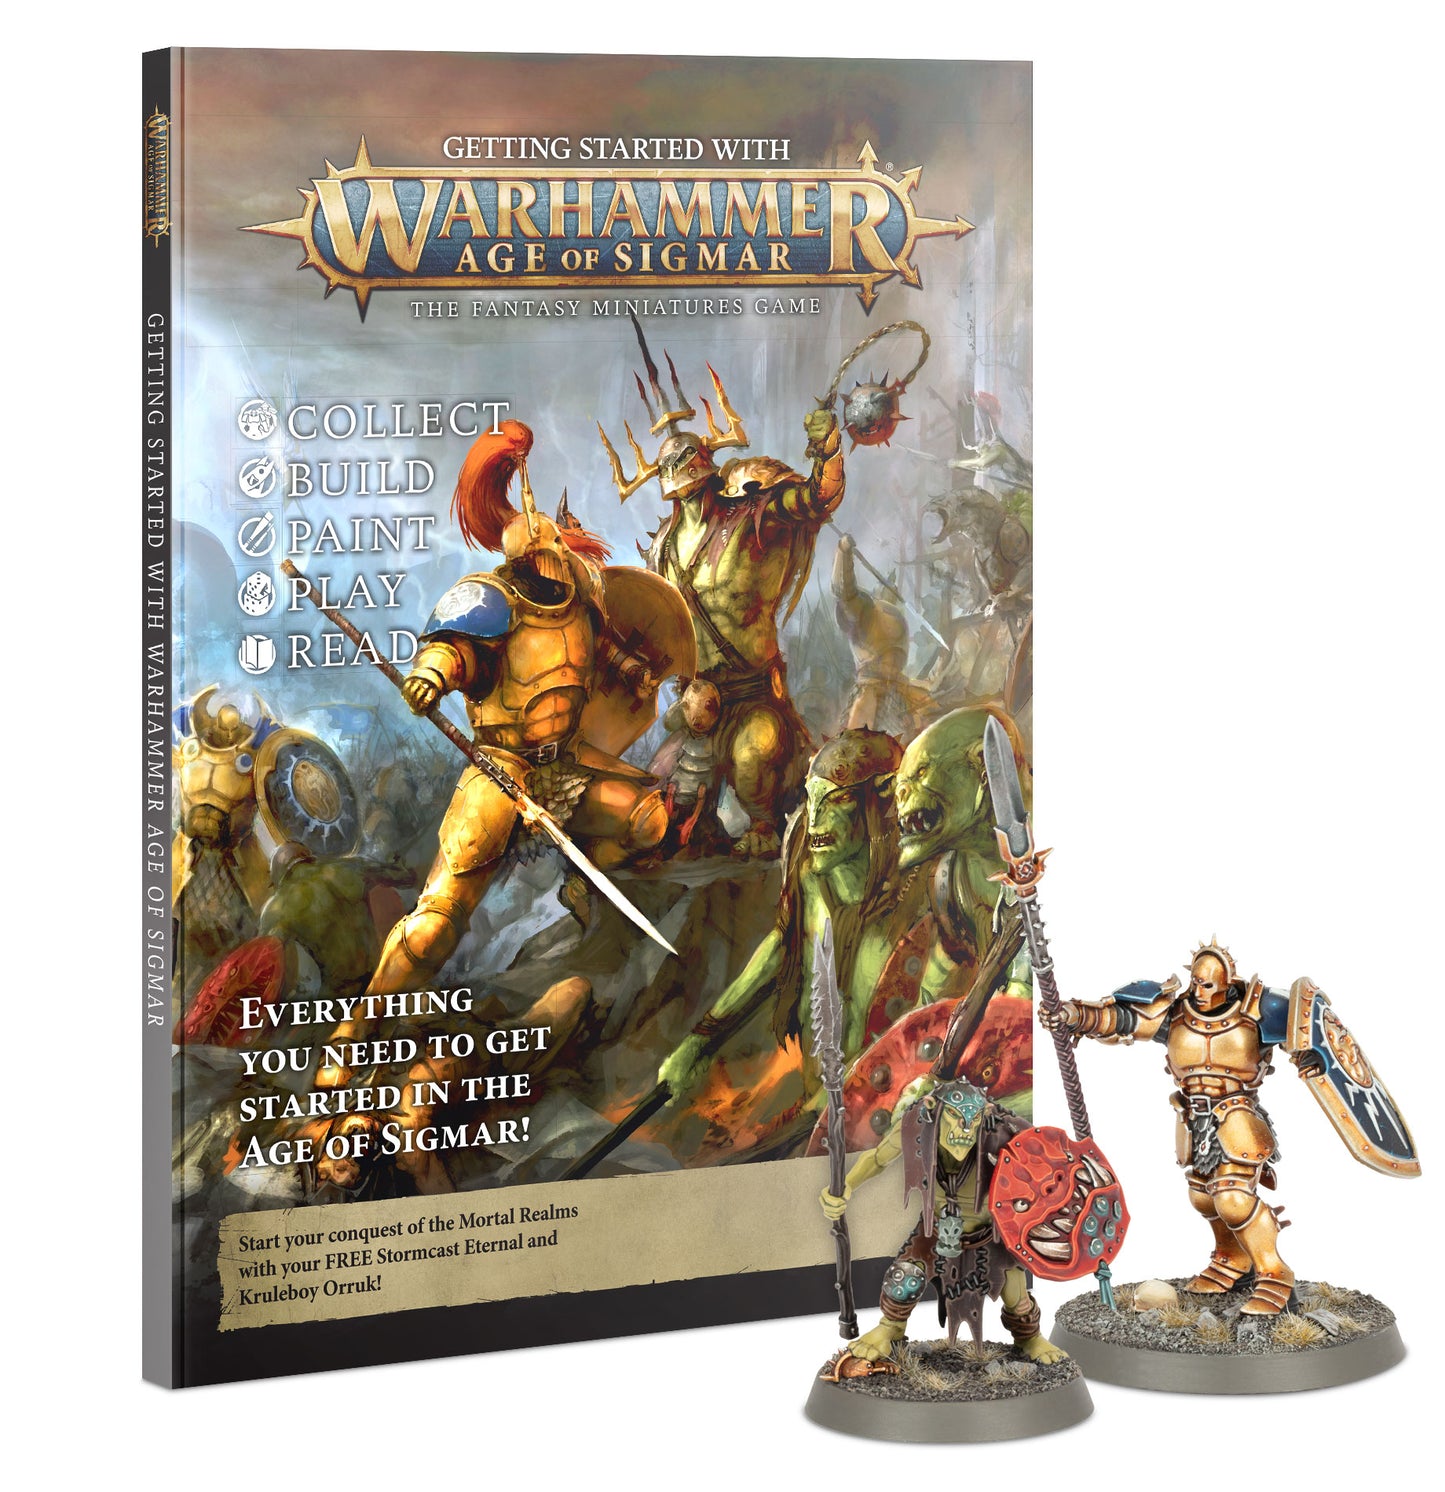 Getting Started with Age of Sigmar 80-16